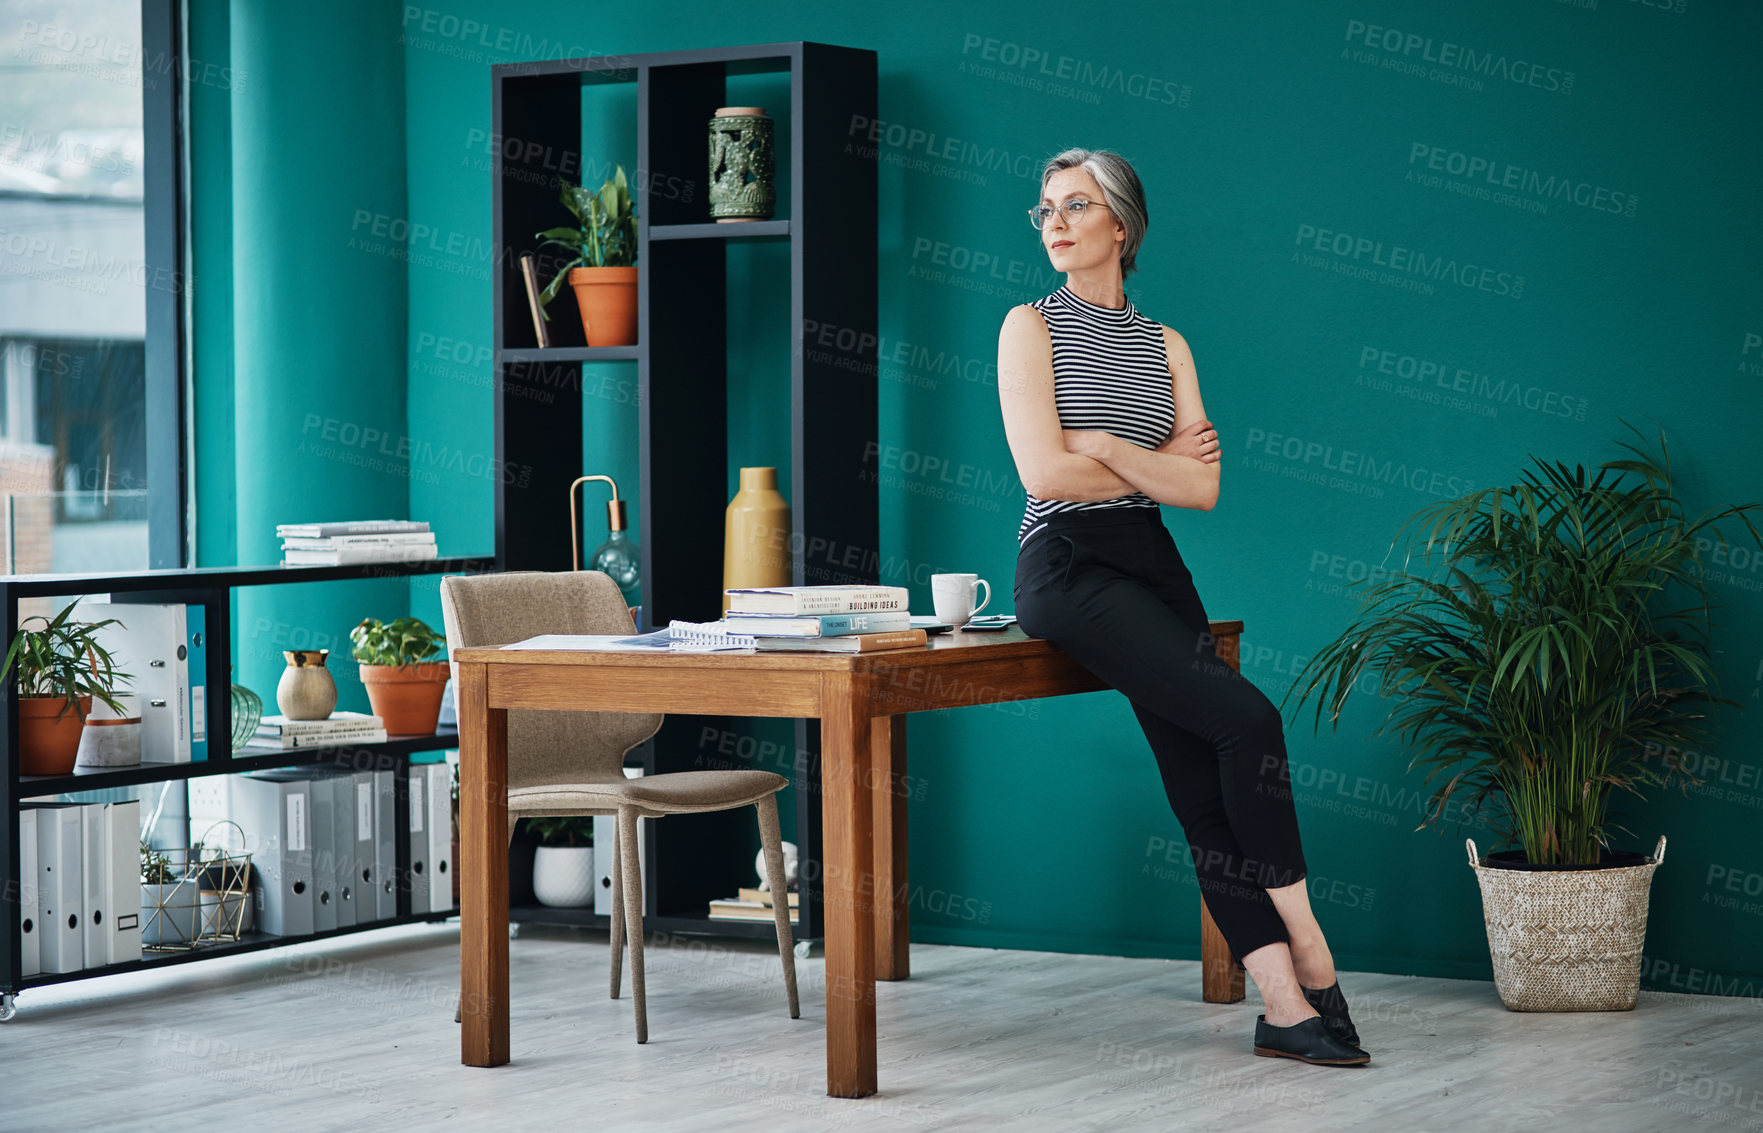 Buy stock photo Shot of a mature businesswoman in a modern office